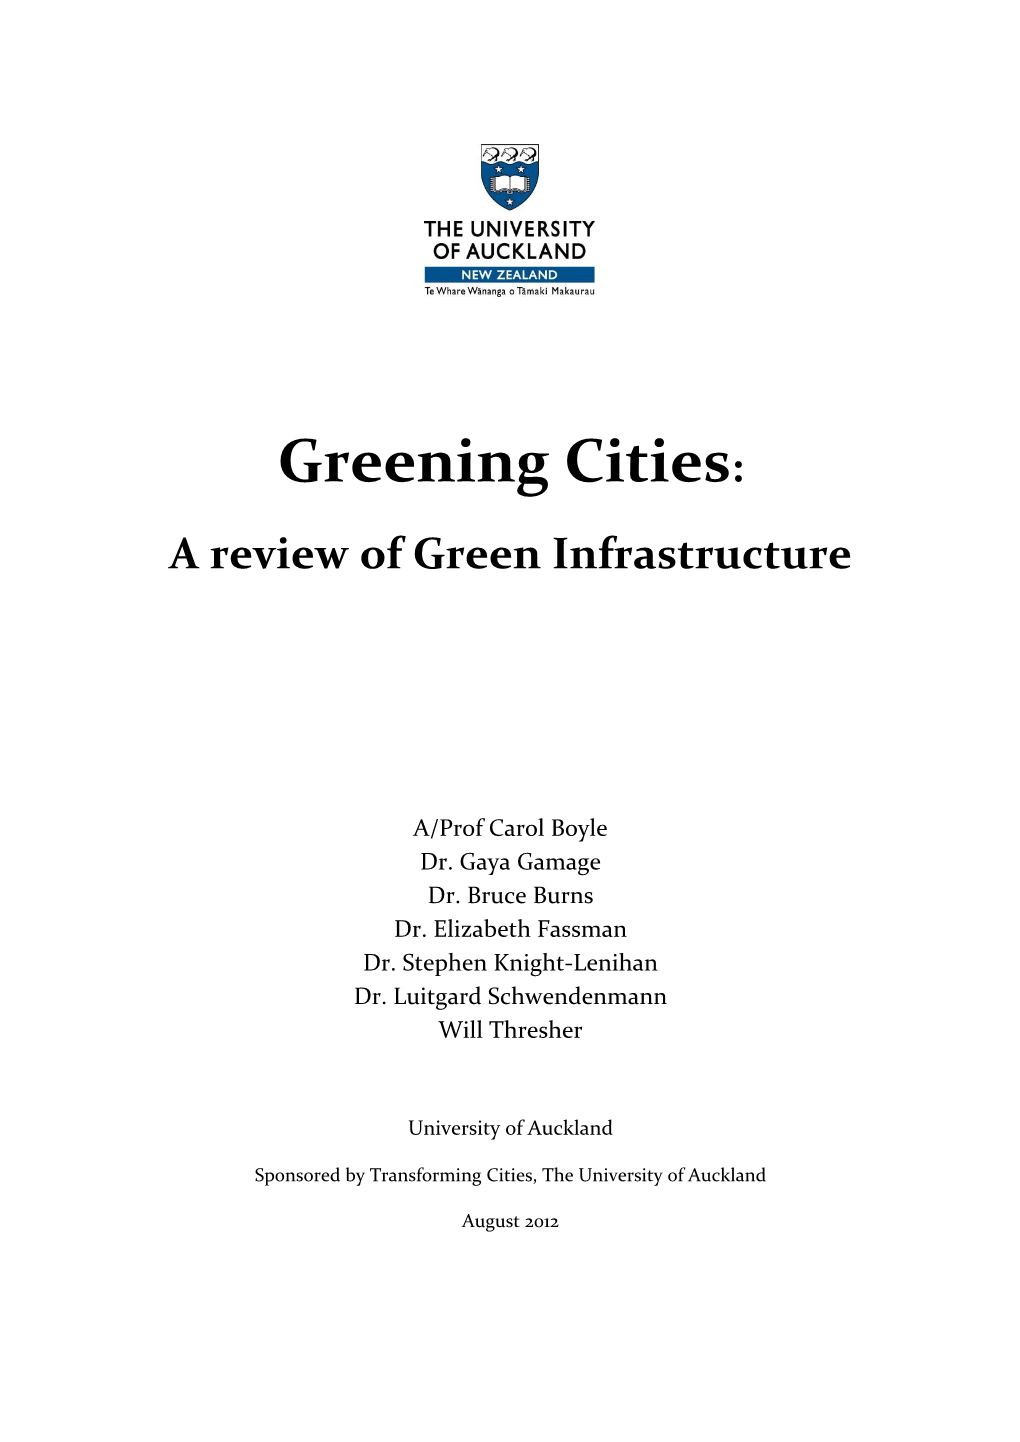 Greening Cities: a Review of Green Infrastructure